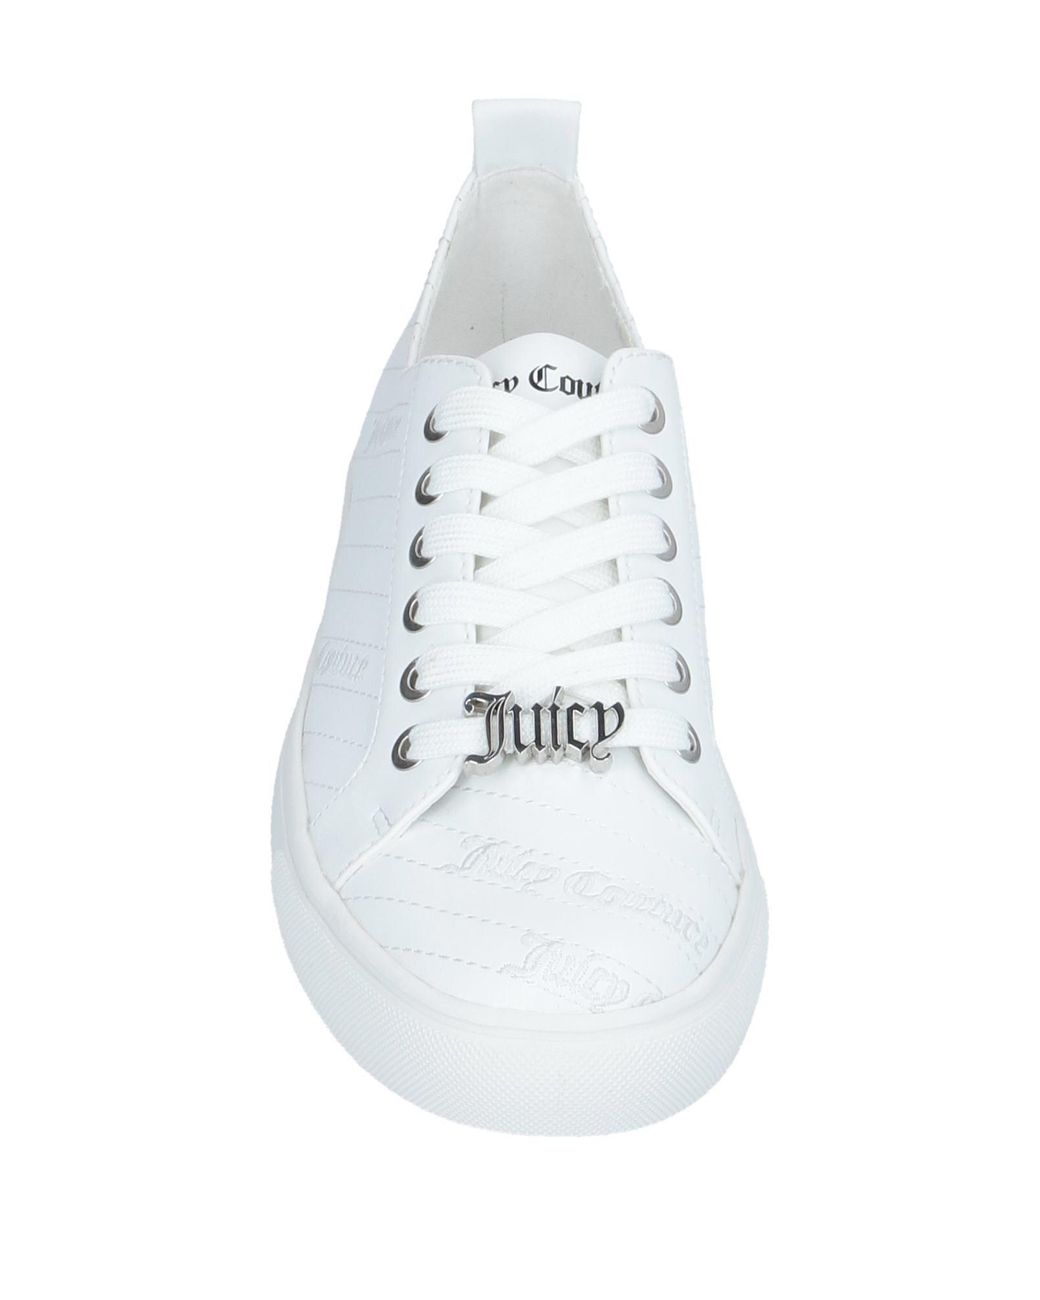 juicy couture White Sneakers